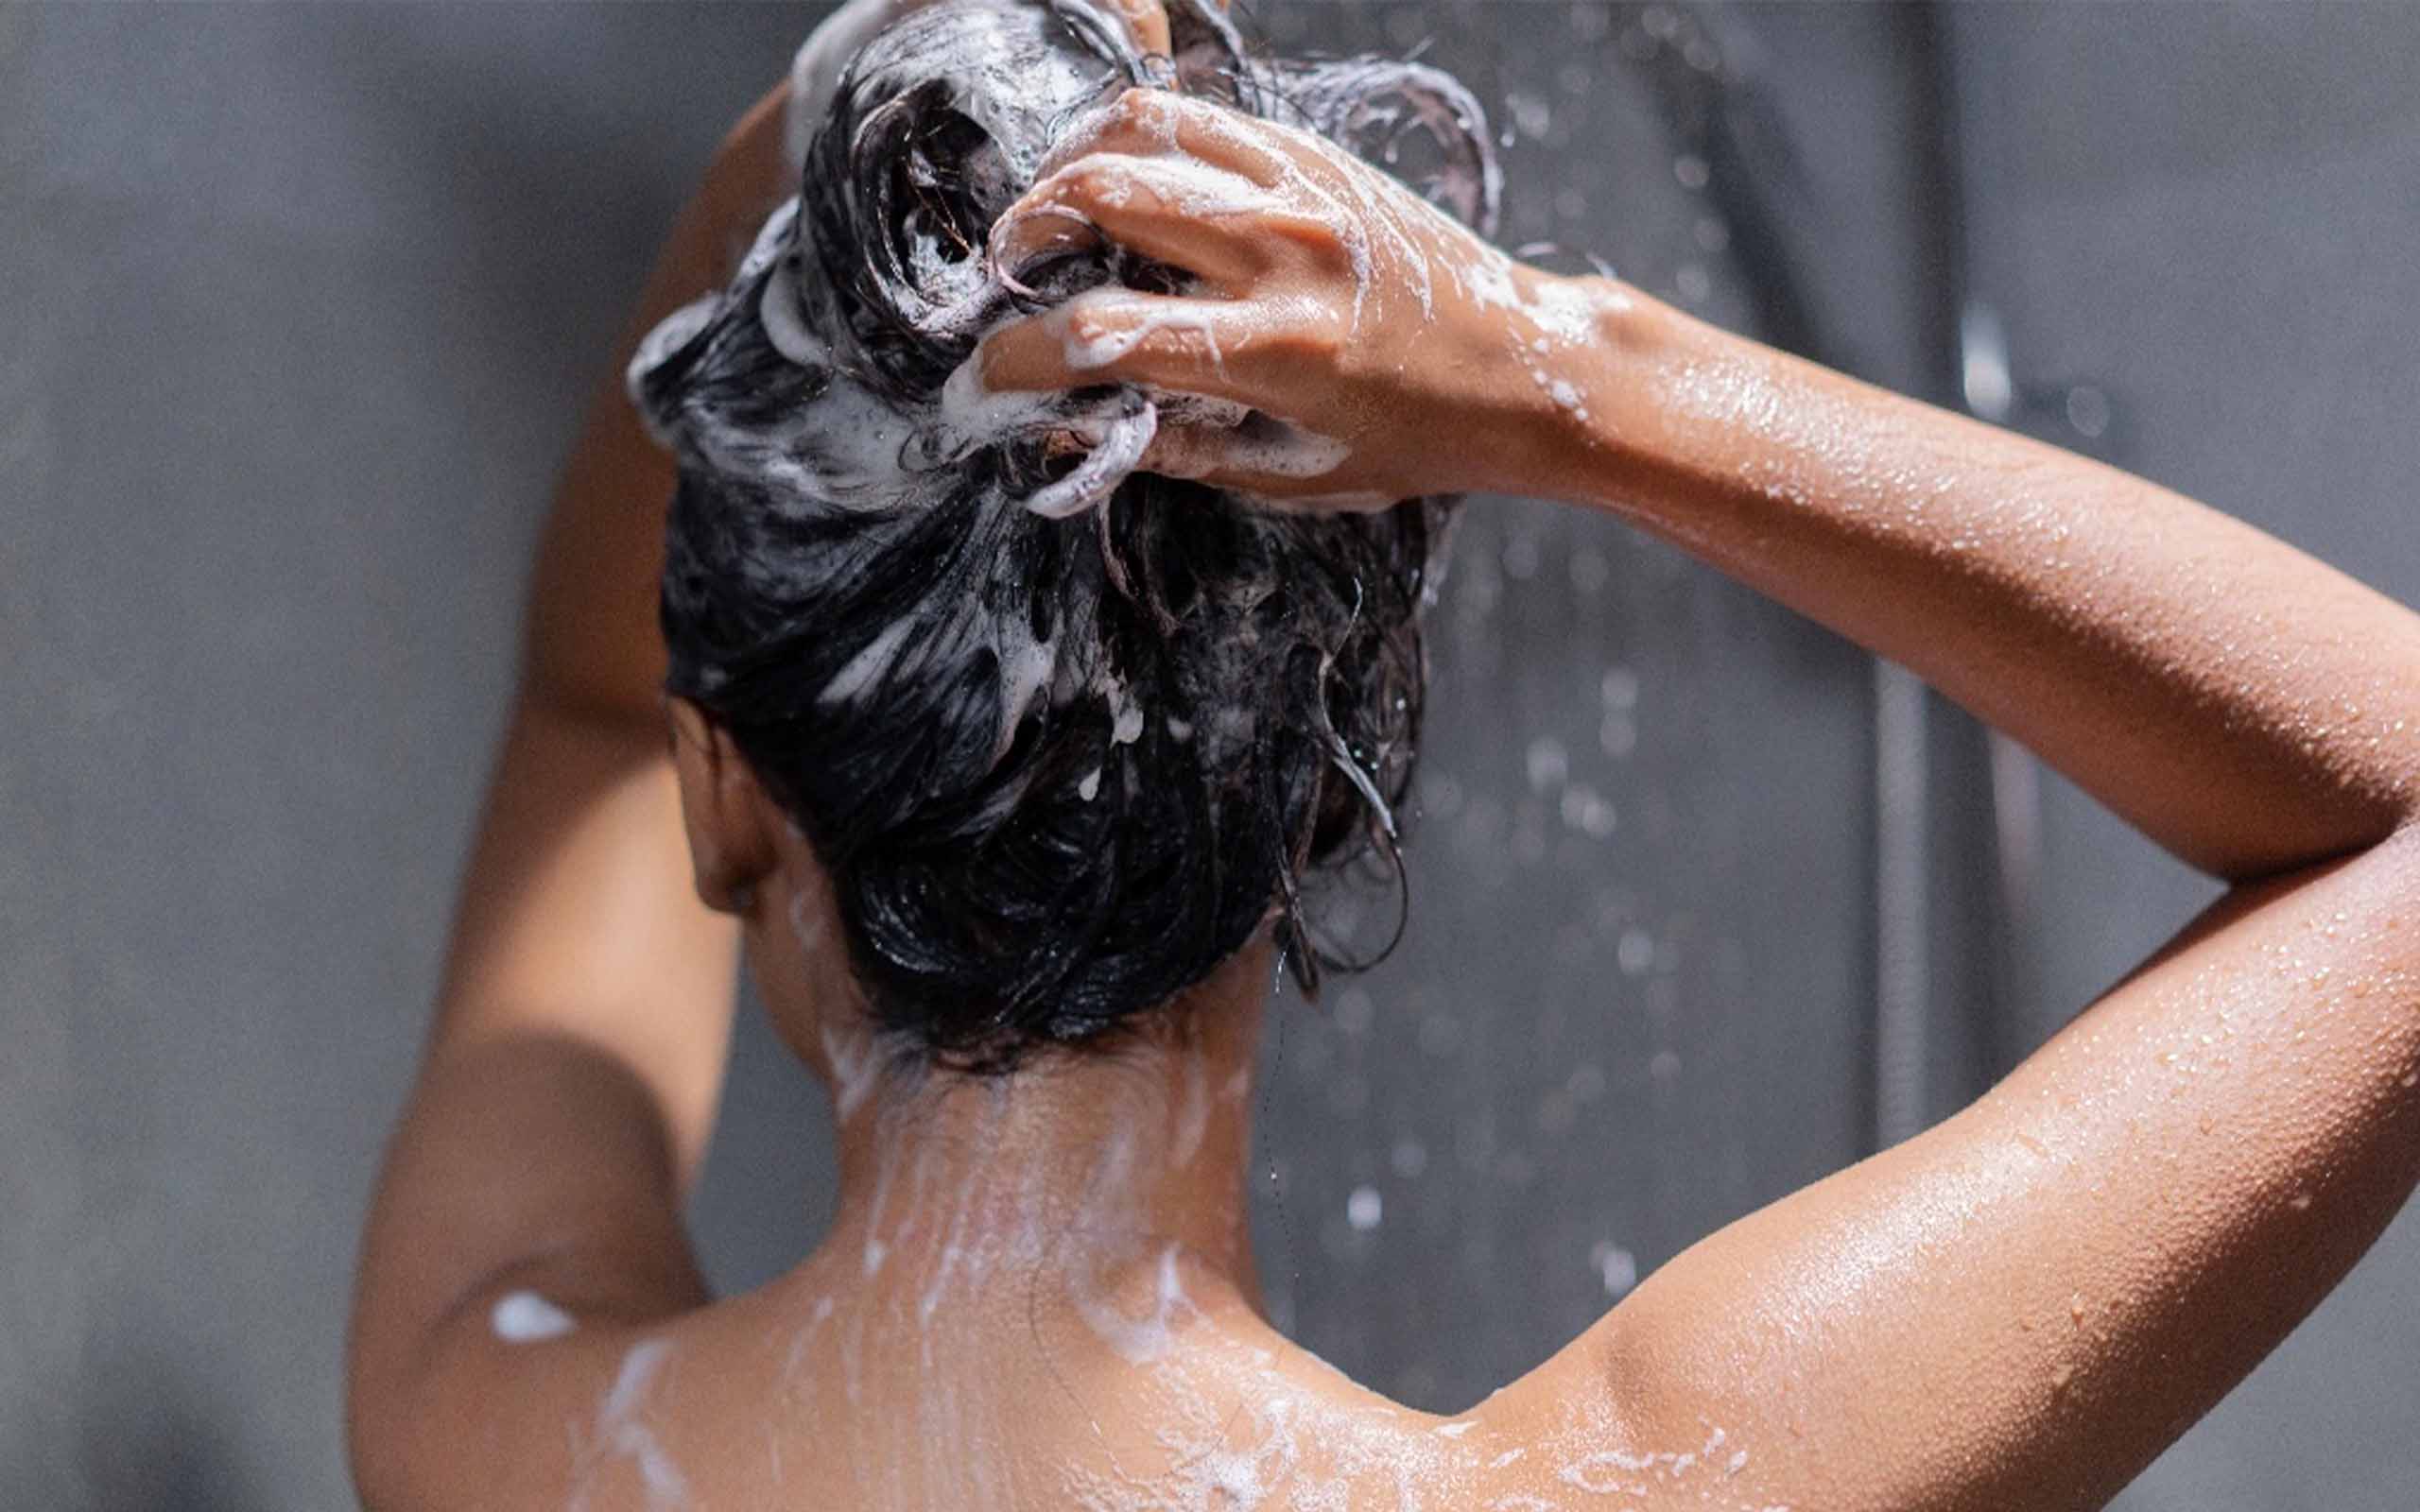 Lathering up hair in the shower